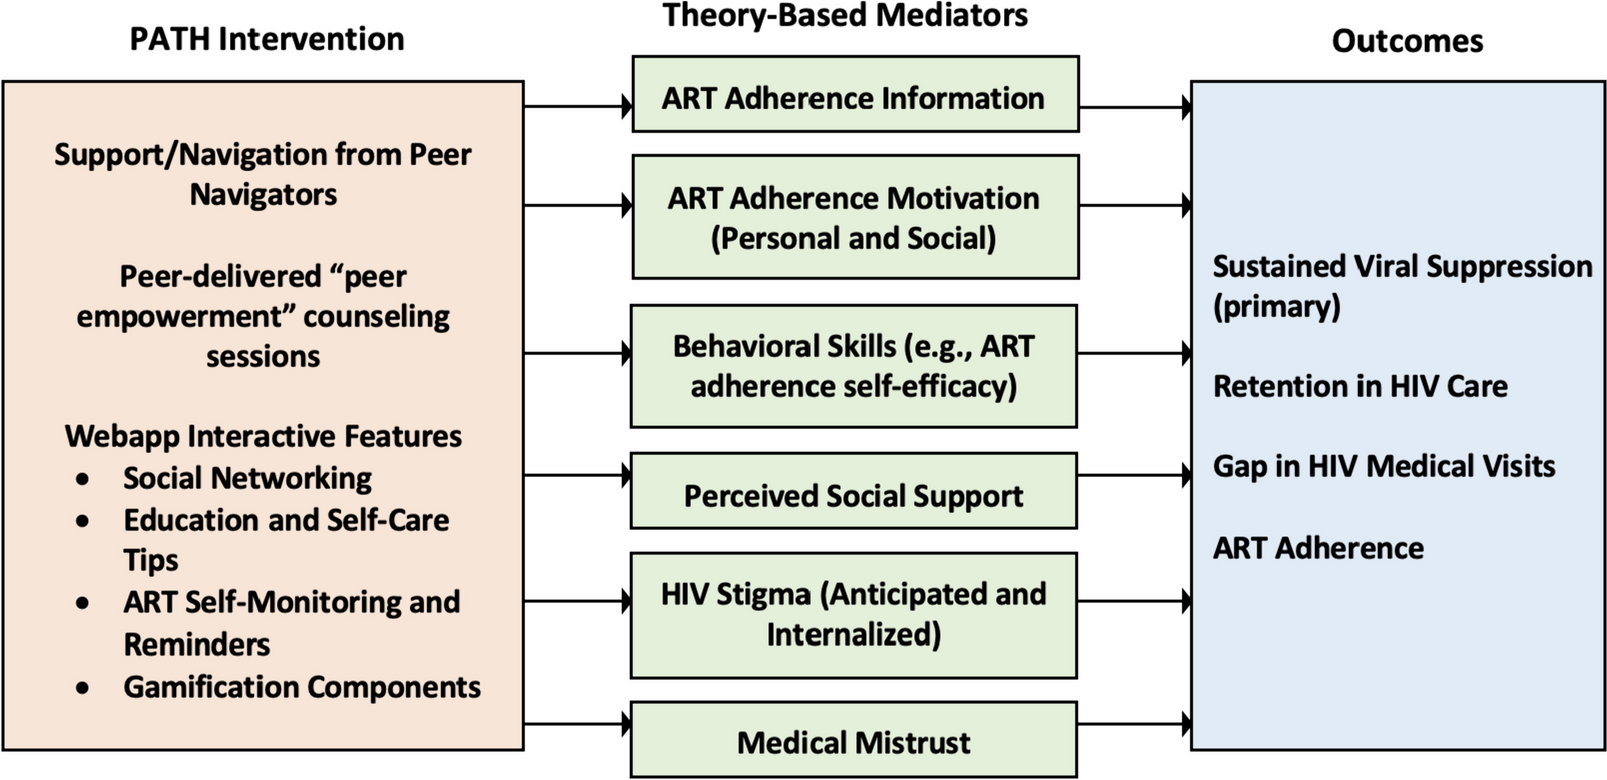 Peers plus mobile app for treatment in HIV (PATH): protocol for a randomized controlled trial to test a community-based integrated peer support and mHealth intervention to improve viral suppression among Hispanic and Black people living with HIV